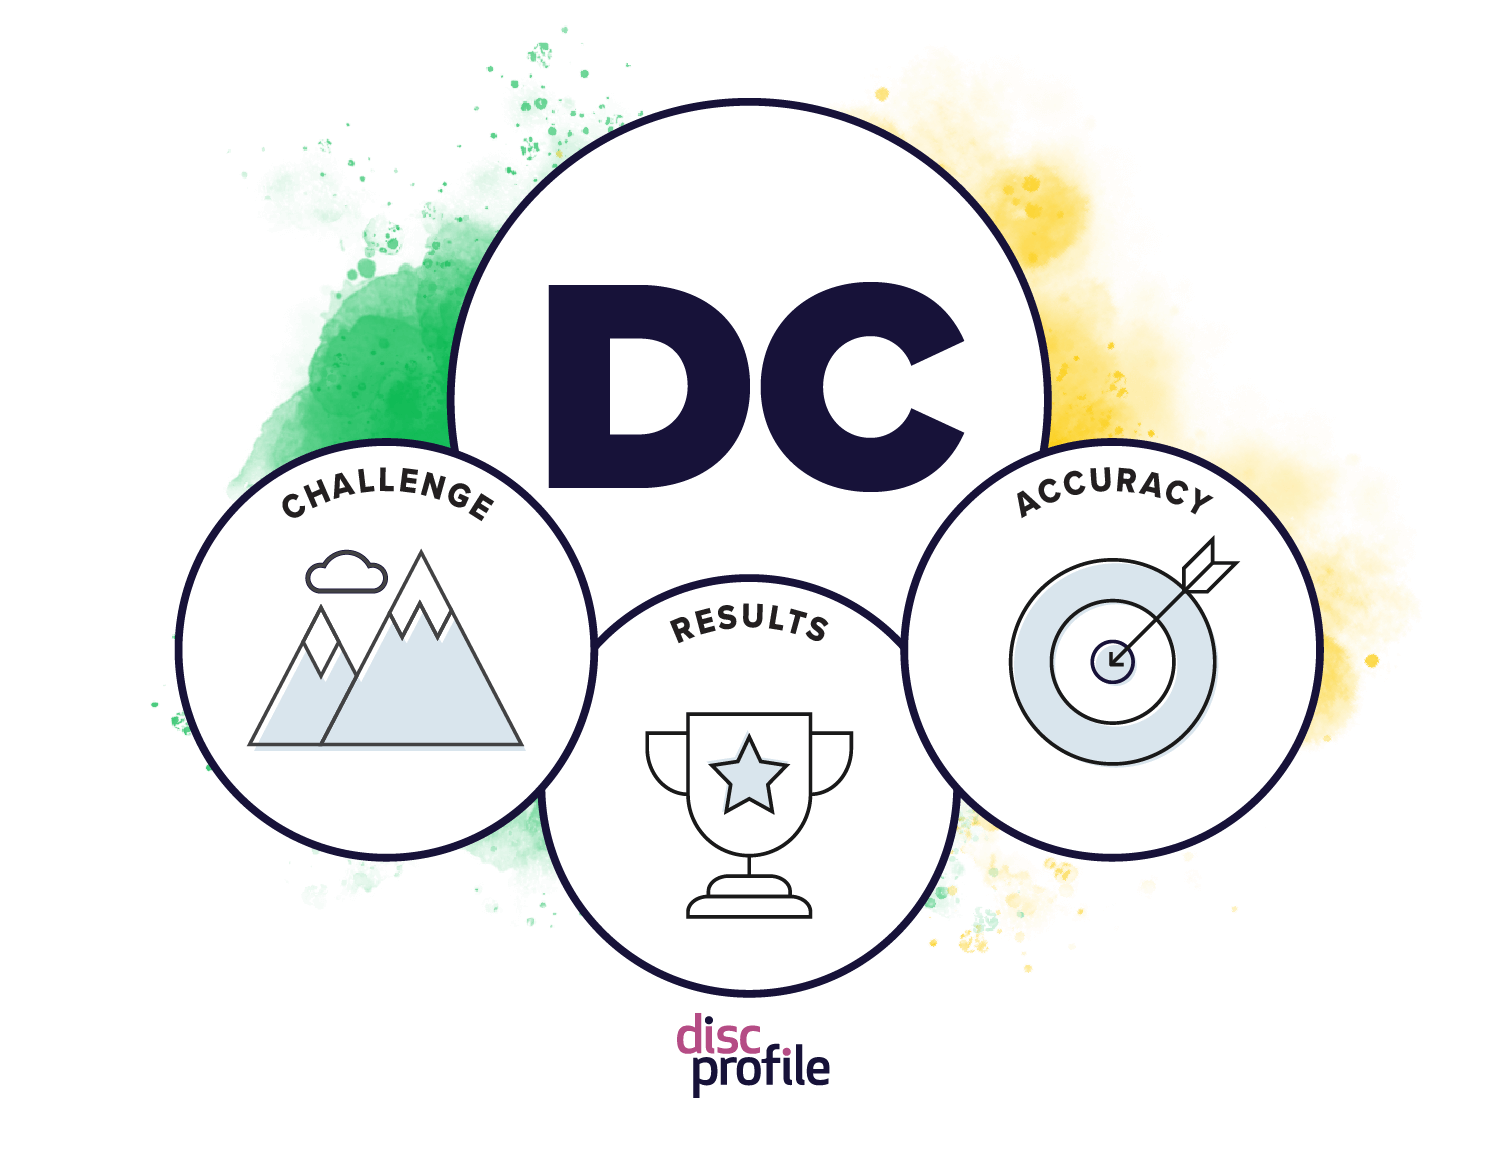 DC style graphic with the priorities of challenge, results, and accuracy